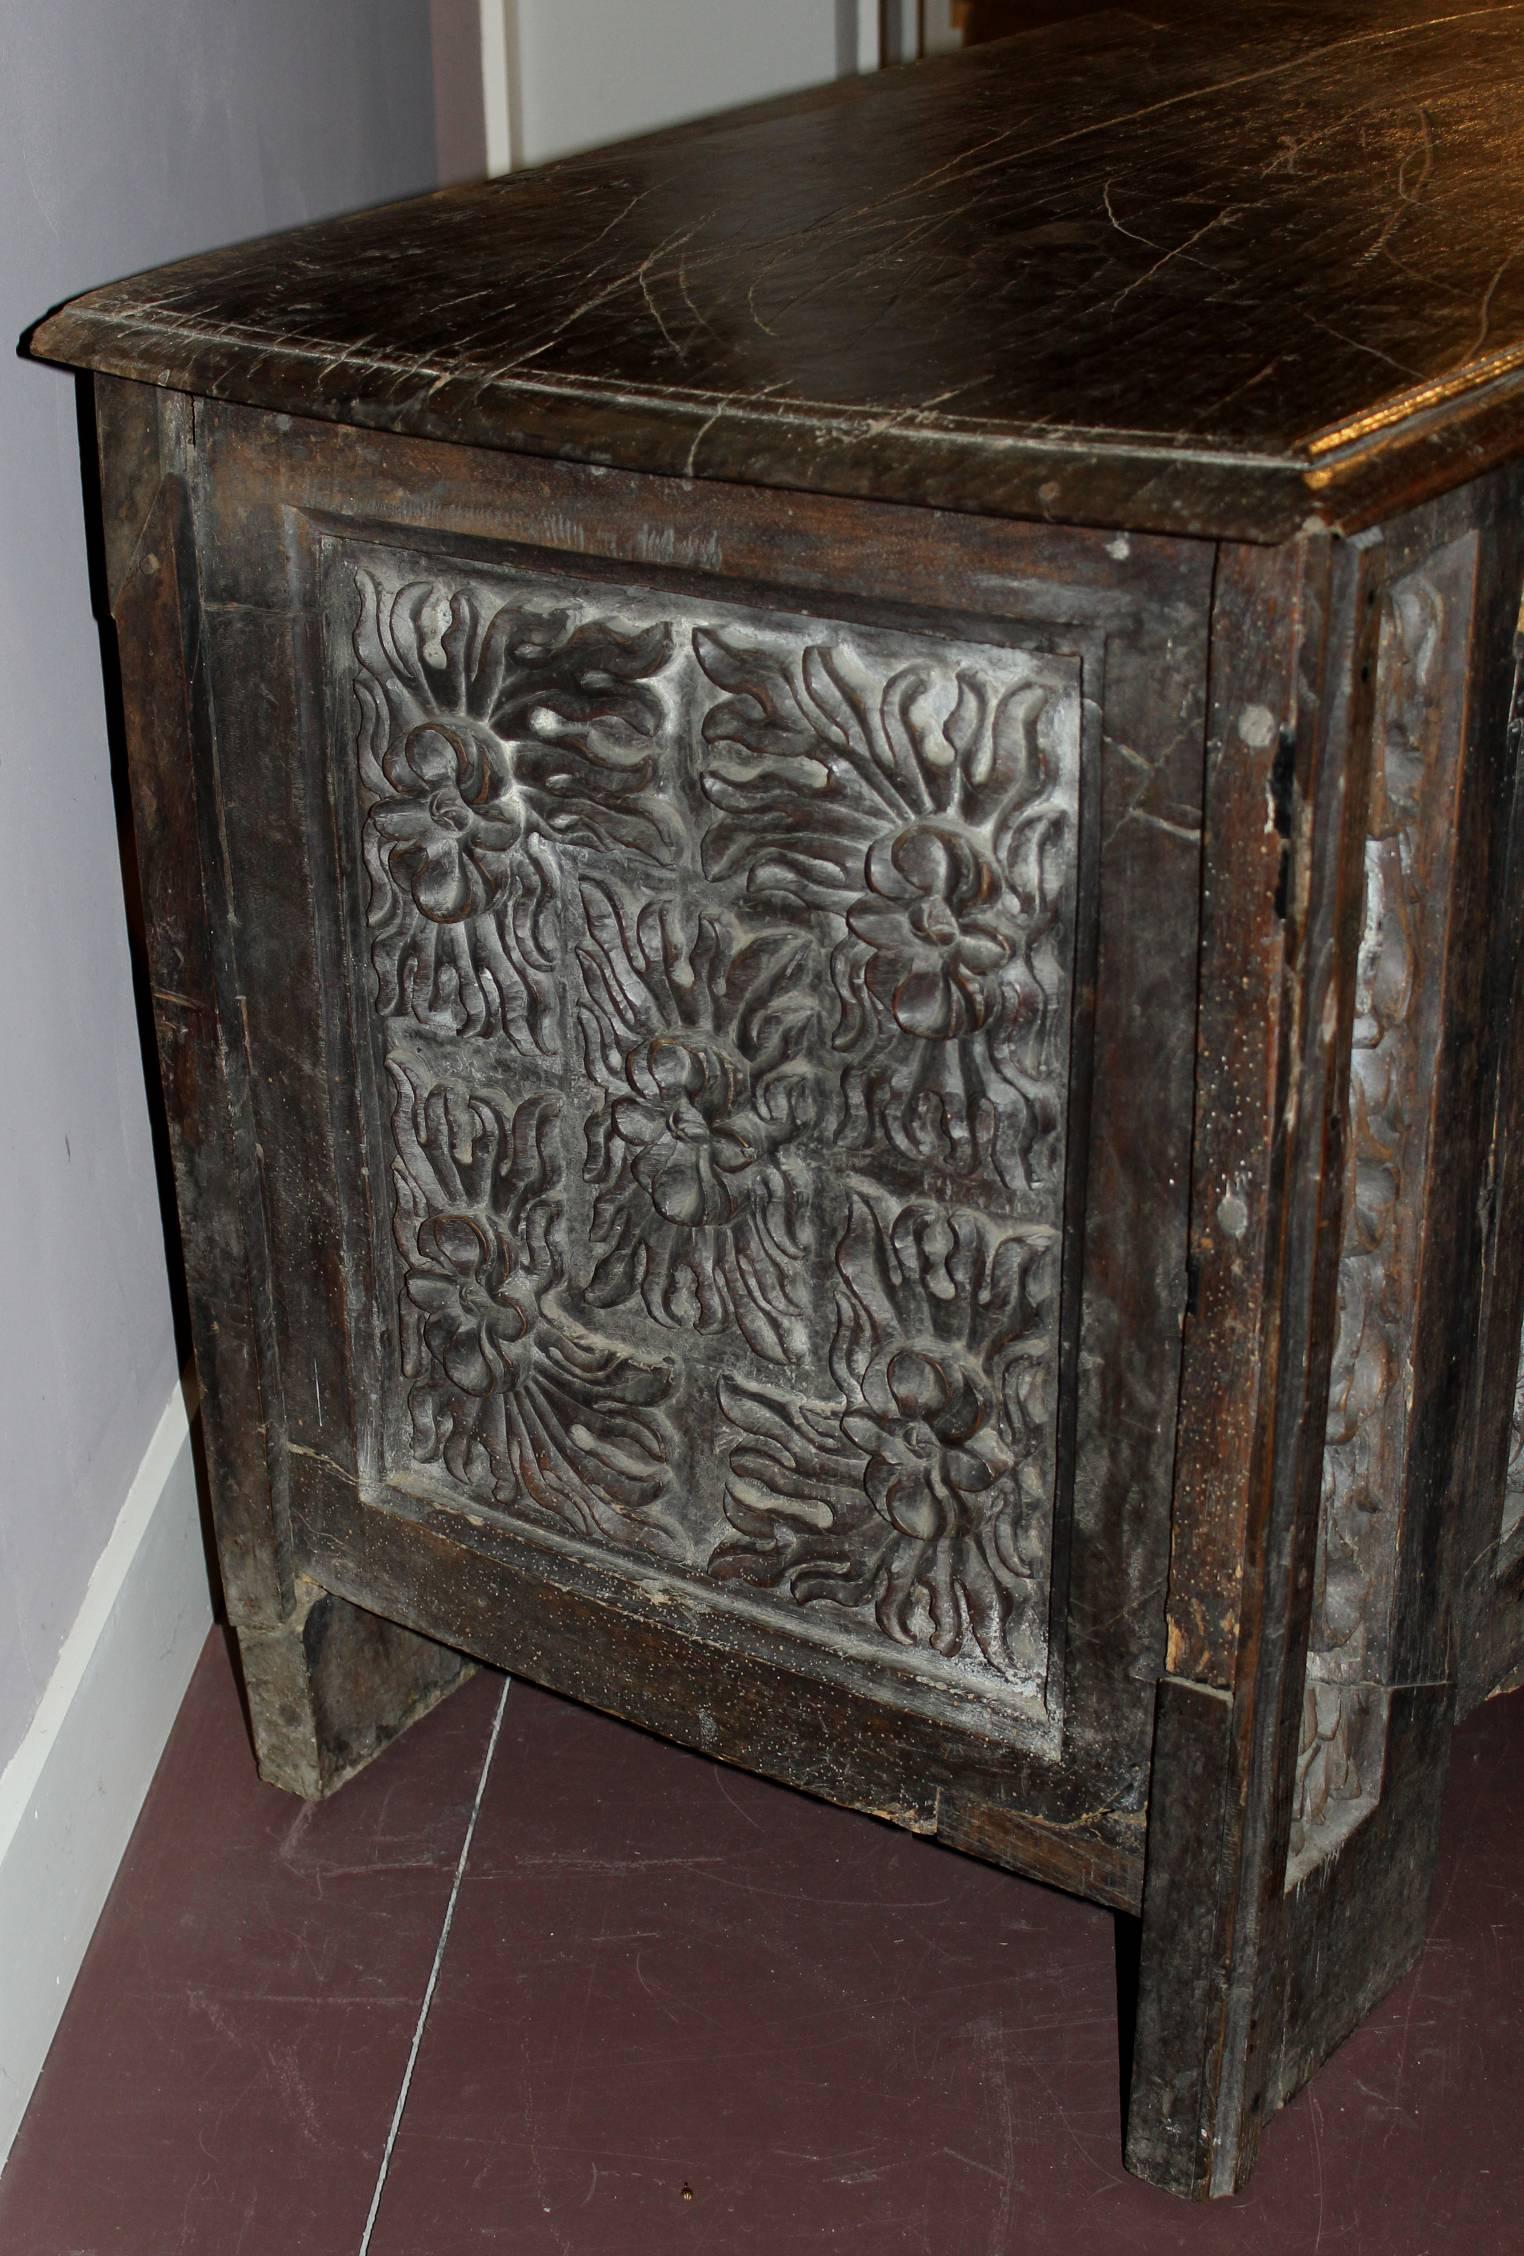 An exceptional polychrome oak coffer with heavily carved foliate panels, dating to the17th century or earlier. Great overall patina and appears to have retained its original iron hinges and lock hardware. Some old repairs, shrinkage, edge losses,